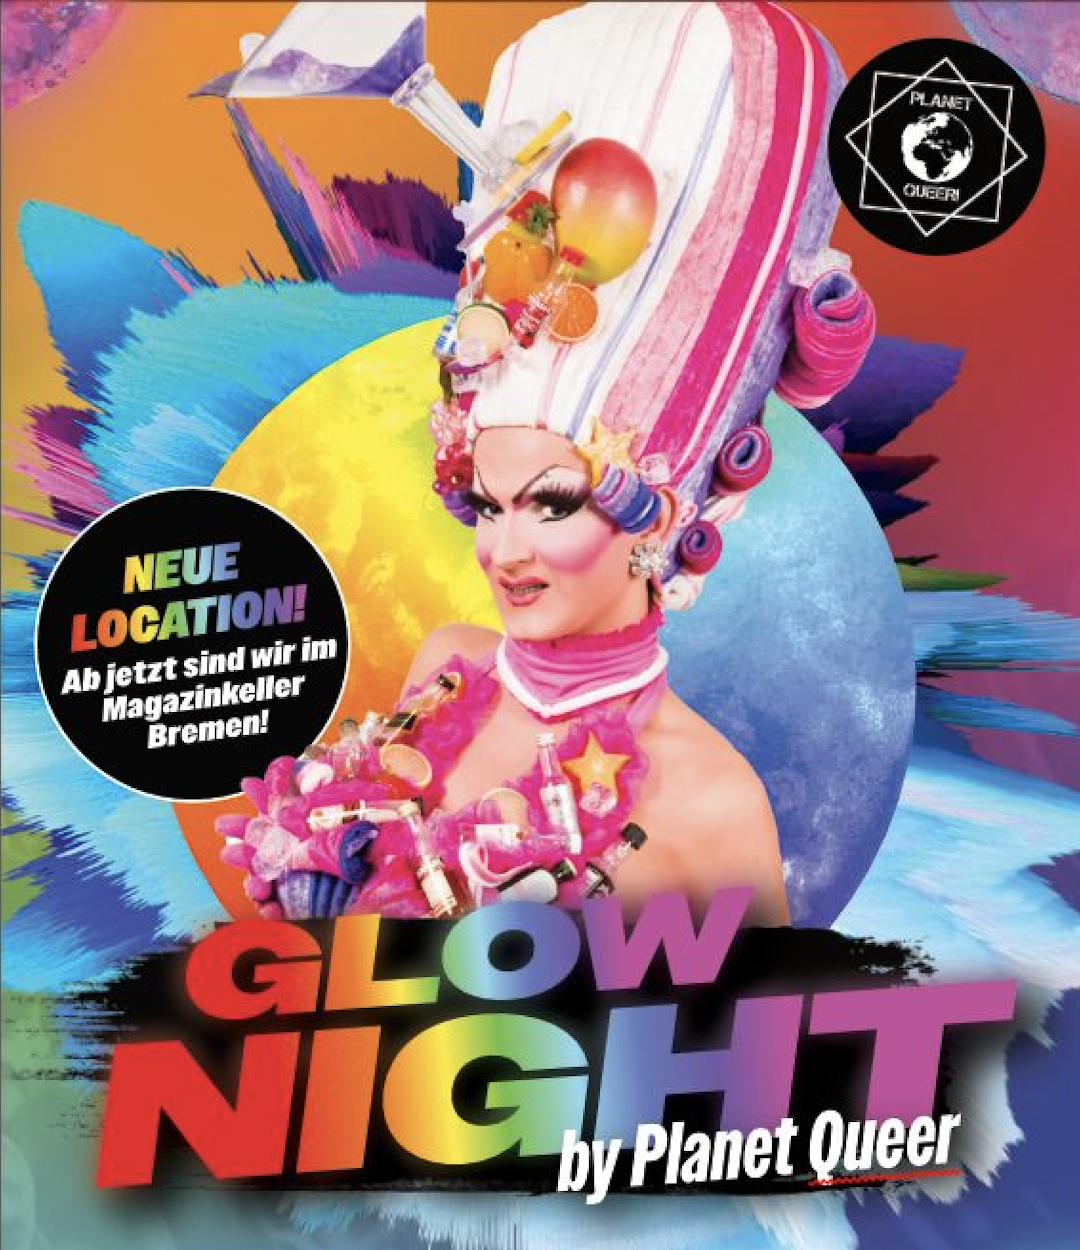 Planet Queer: GLOW NIGHT